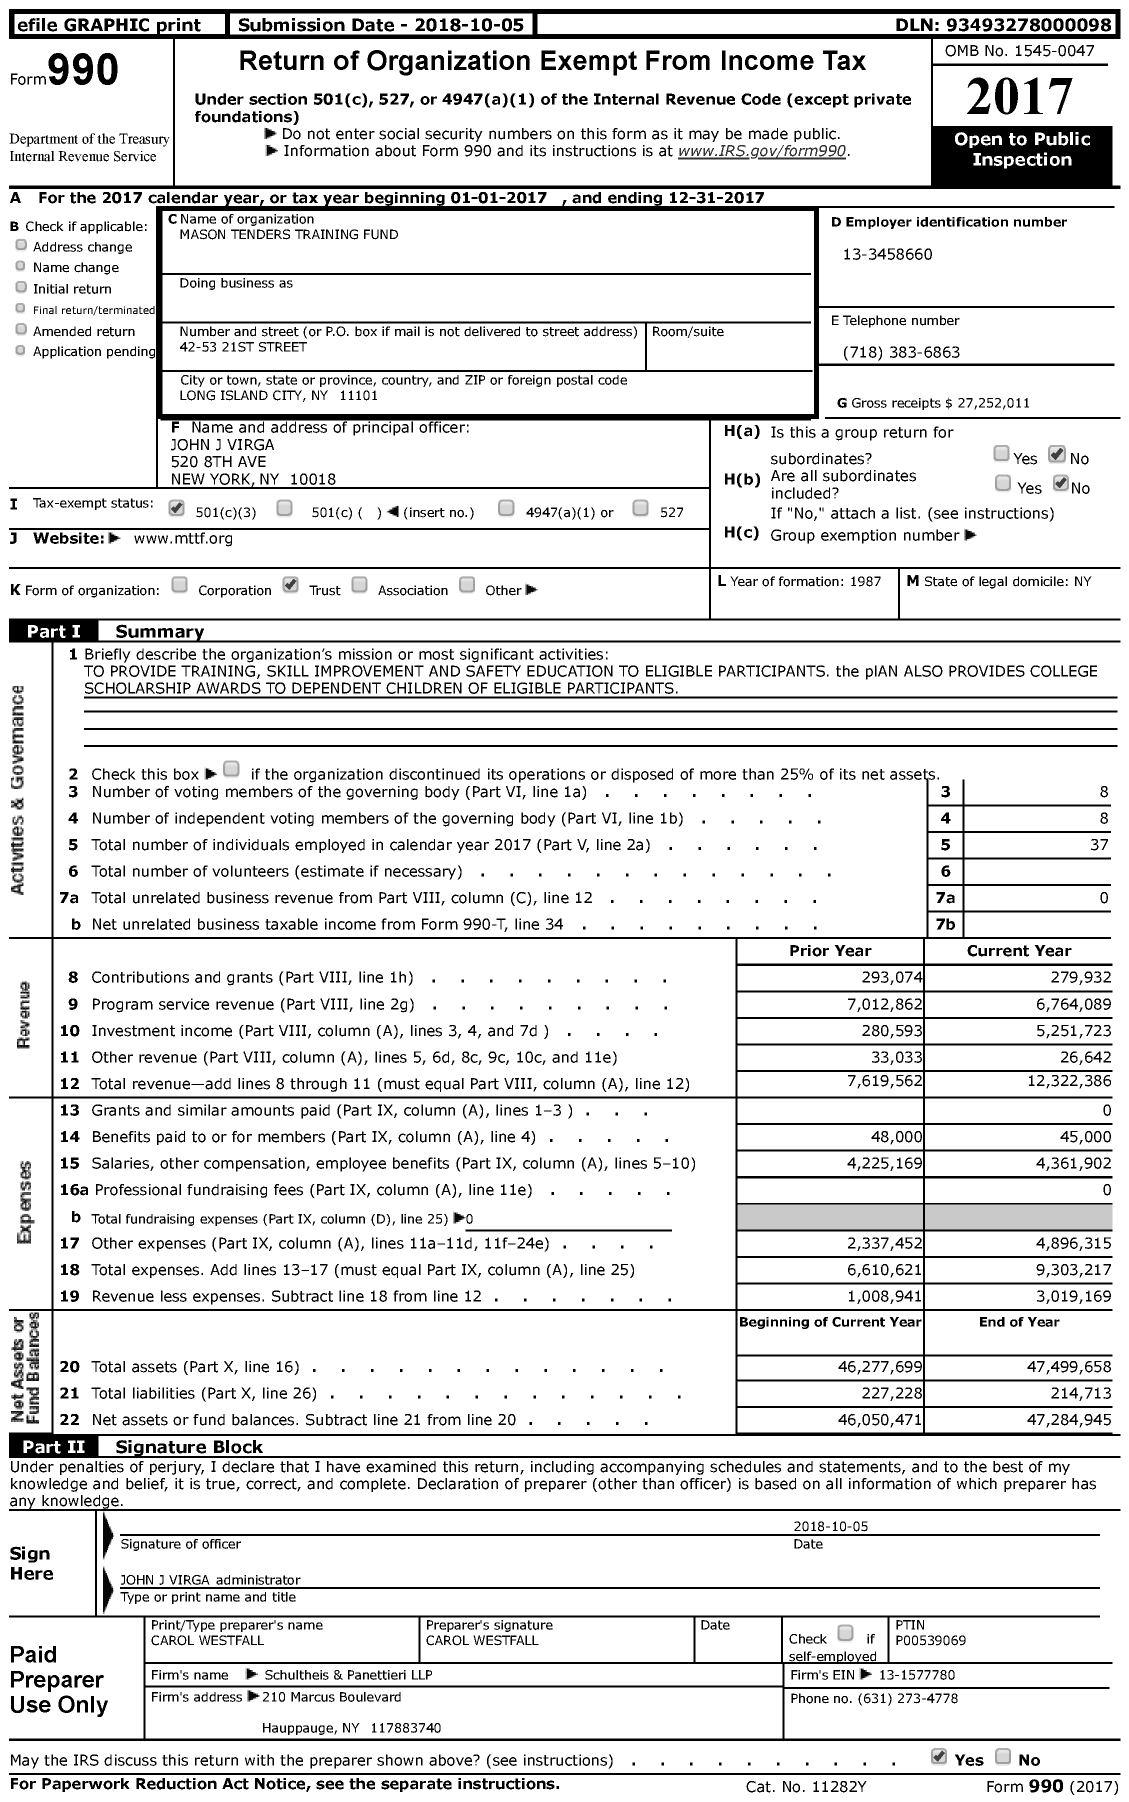 Image of first page of 2017 Form 990 for Mason Tenders' Training Fund (MTTF)